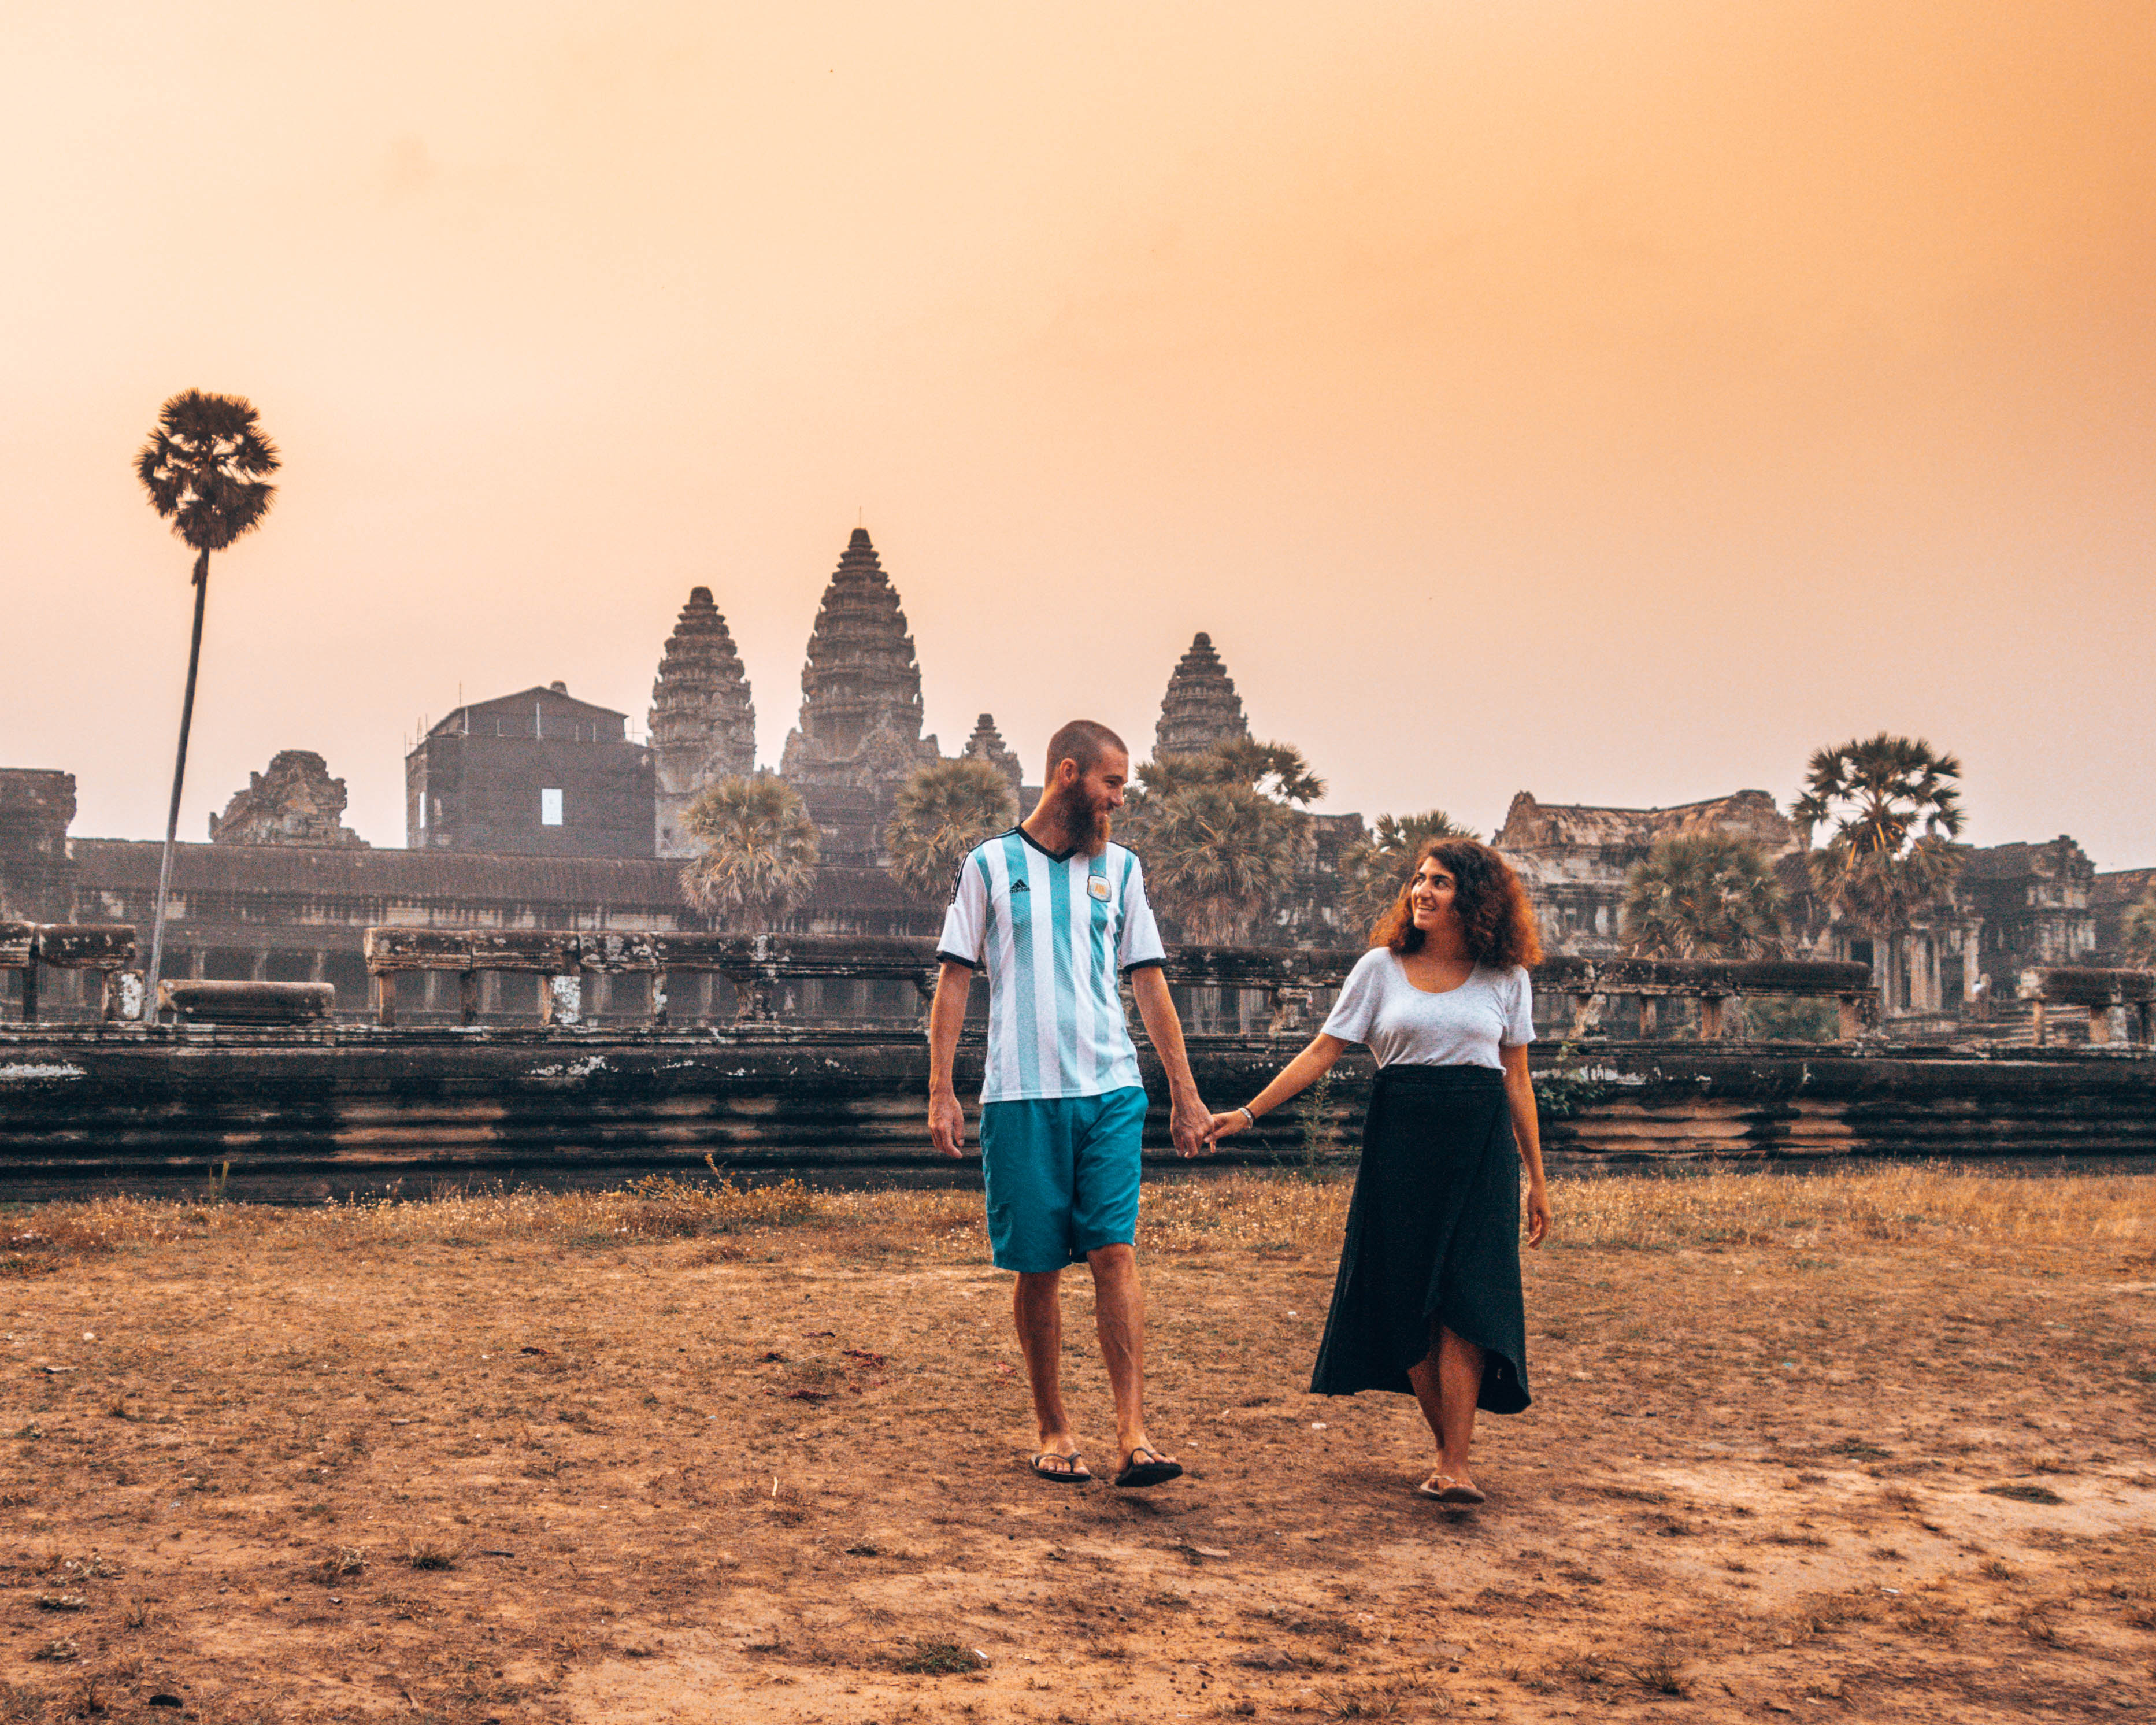 Sunrise at Angkor Wat - Off-the-beaten-path guide - WeDidItOurWay.com